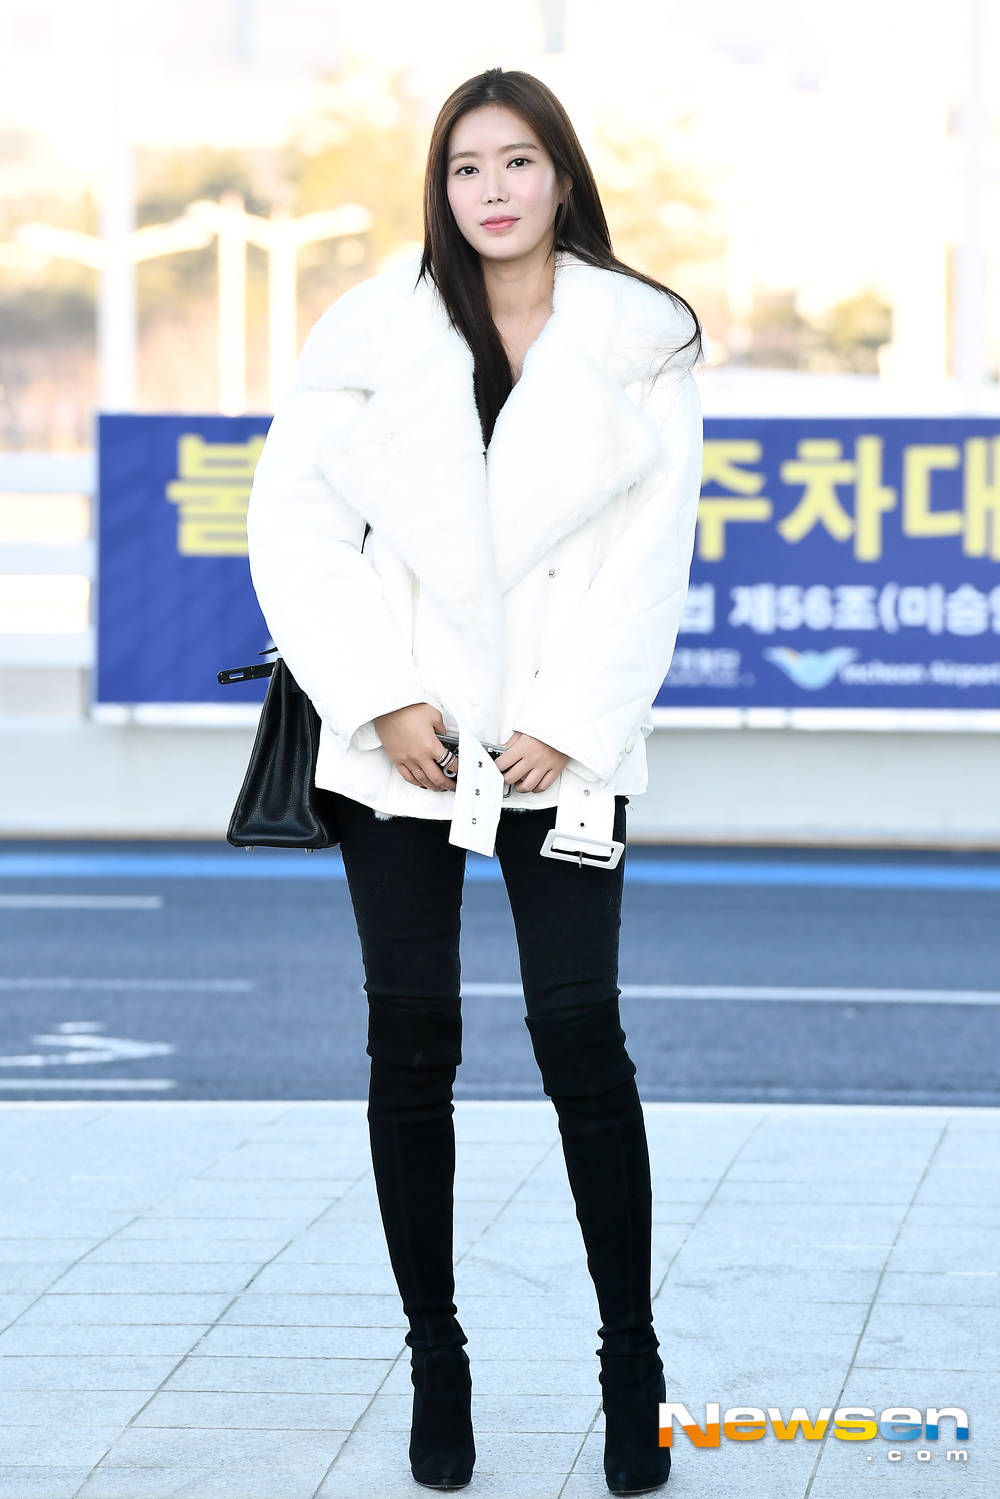 Actor Im Soo-hyang left for Shanghai, China on a schedule overseas through the Incheon International Airport in Unseo-dong, Jung-gu, Incheon on the morning of January 9th.Actor Im Soo-hyang is leaving for Shanghai, China, showing off his airport fashion.exponential earthquake